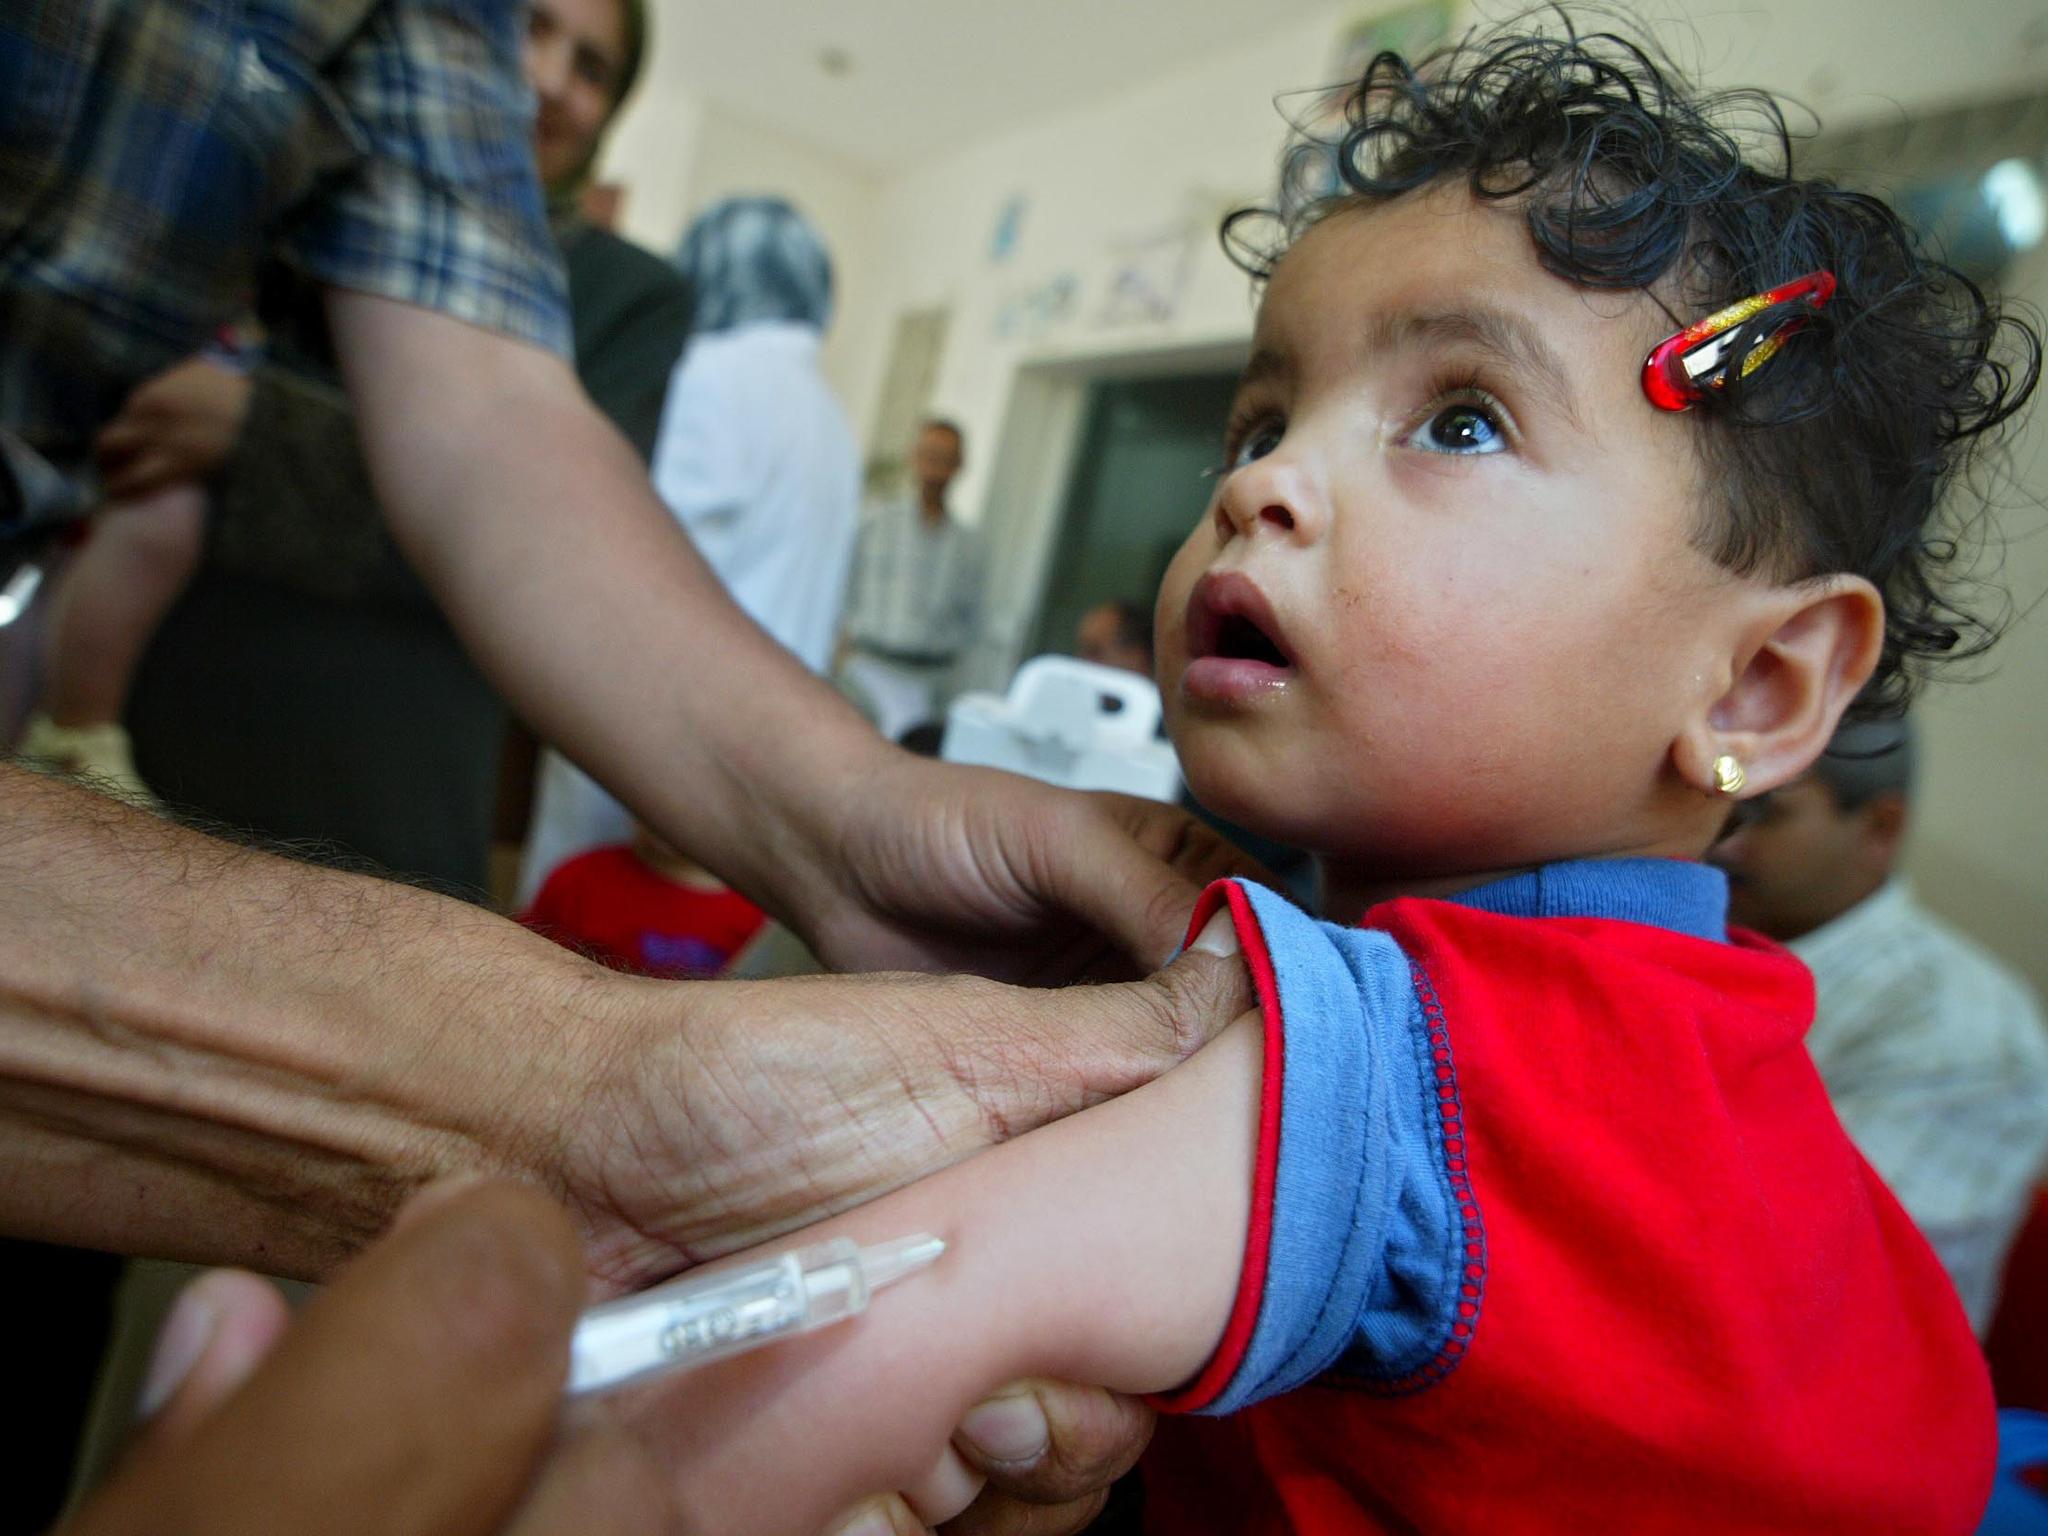 Measles cases rise around the world 'because parents shun vaccines', WHO says